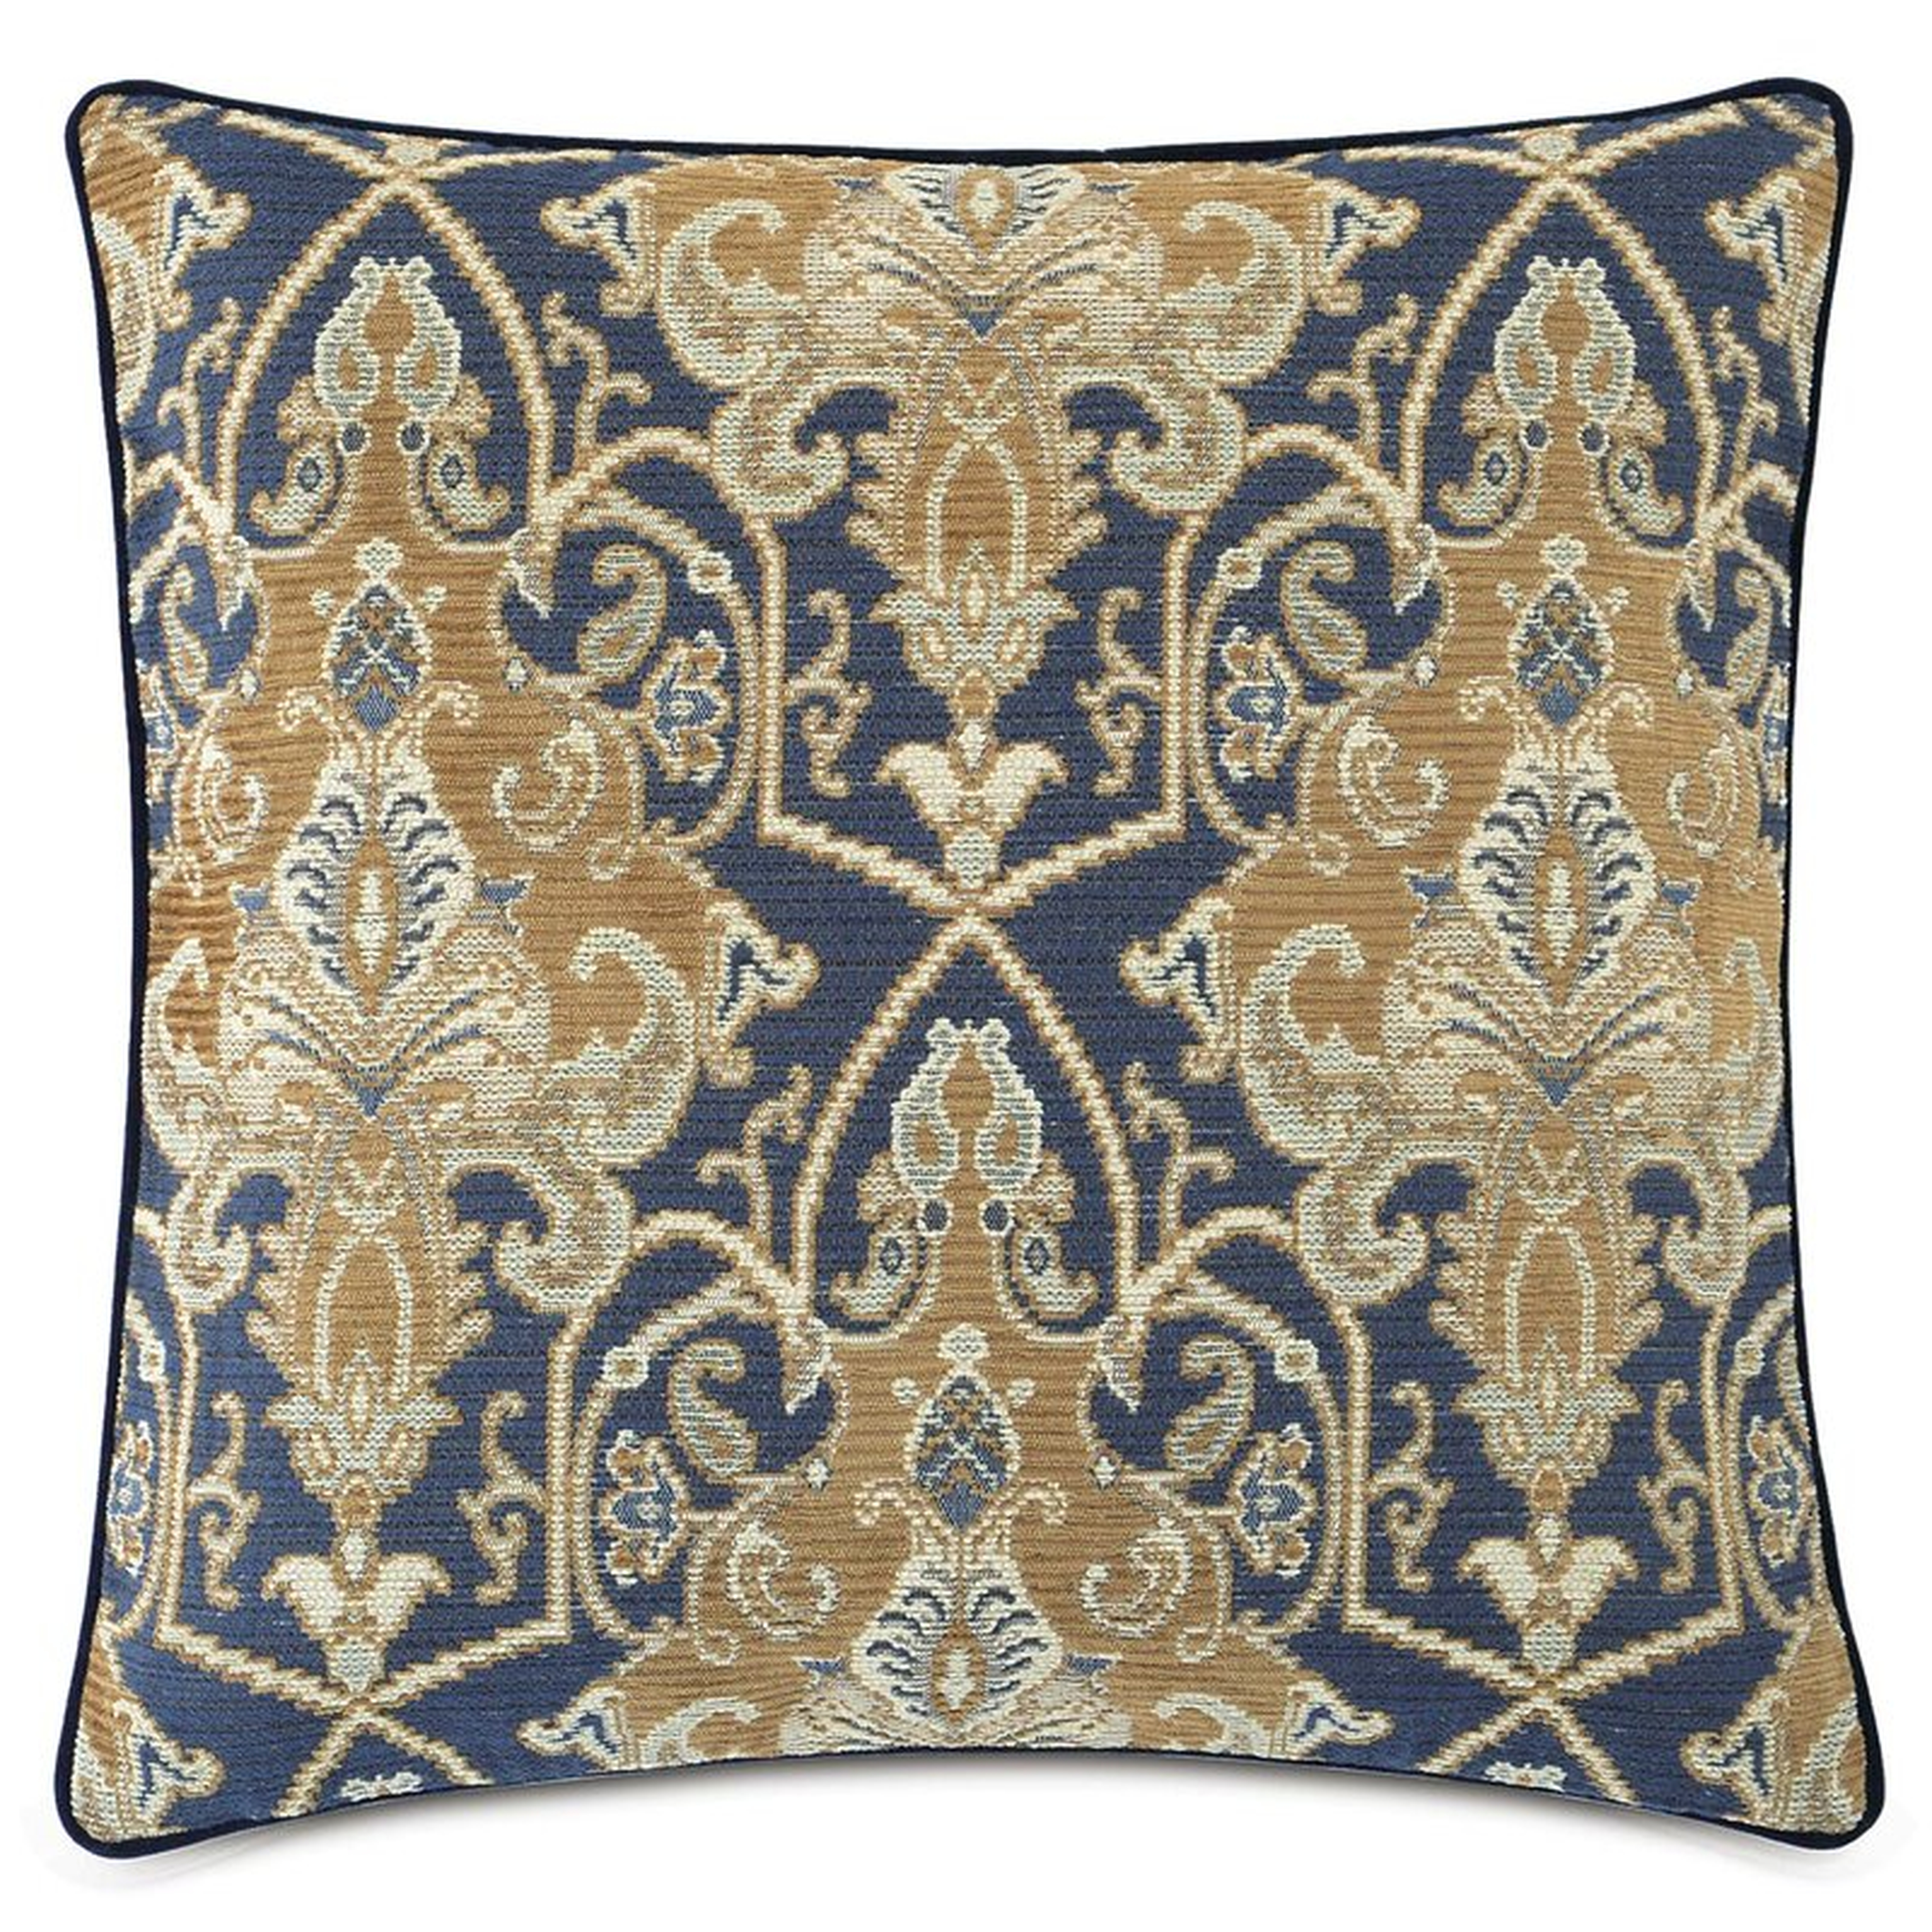 Eastern Accents James Jewel Throw Pillow - Perigold